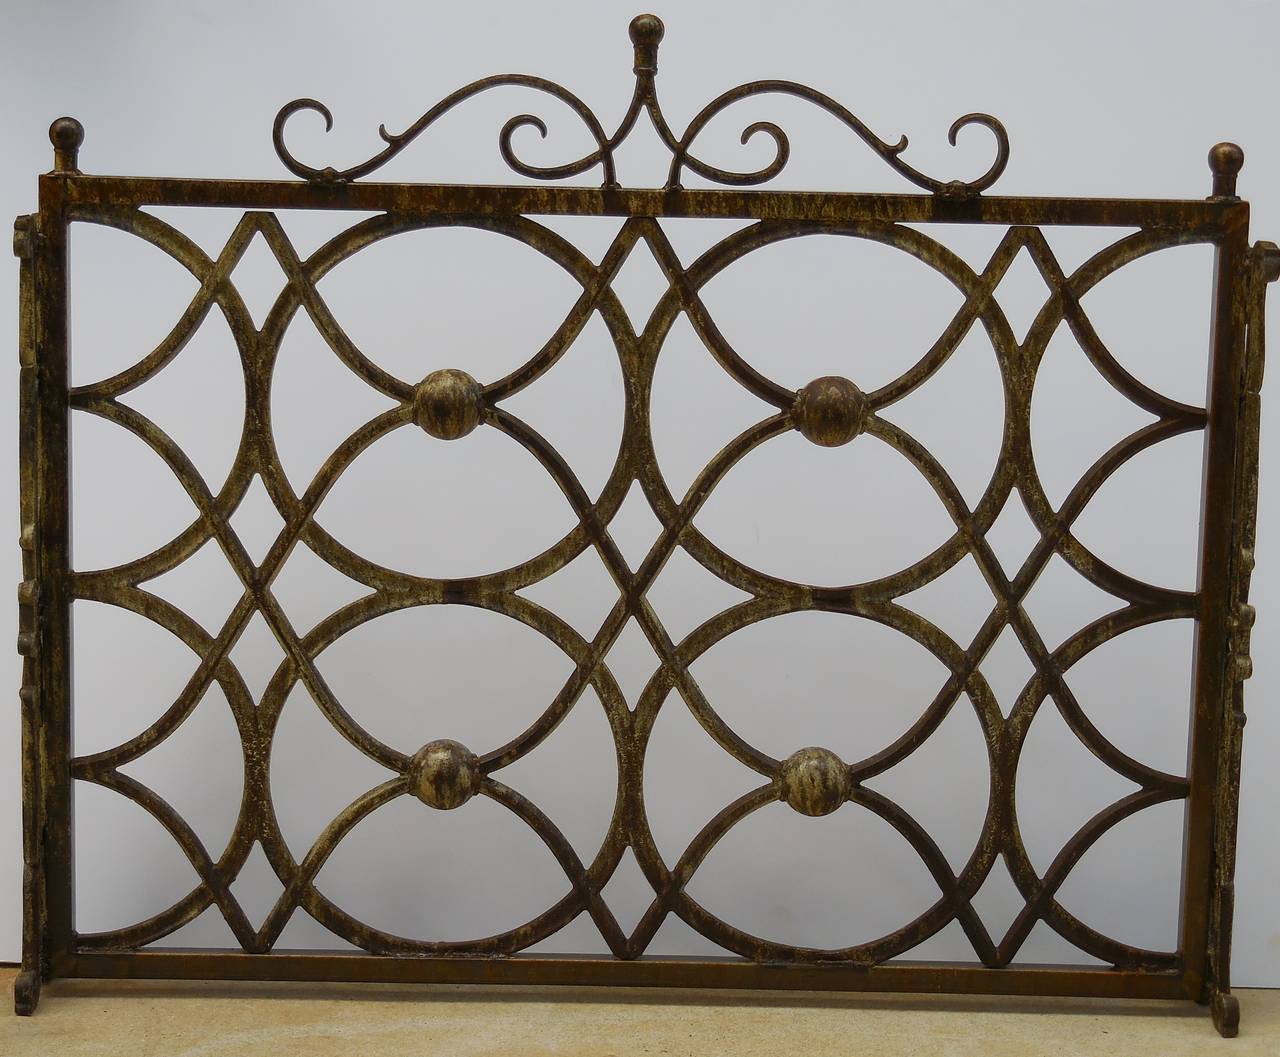 Architectural fireplace screen made of cast iron, with four iron circle held together and four balls in the center.
Great patina.
Firm standing.